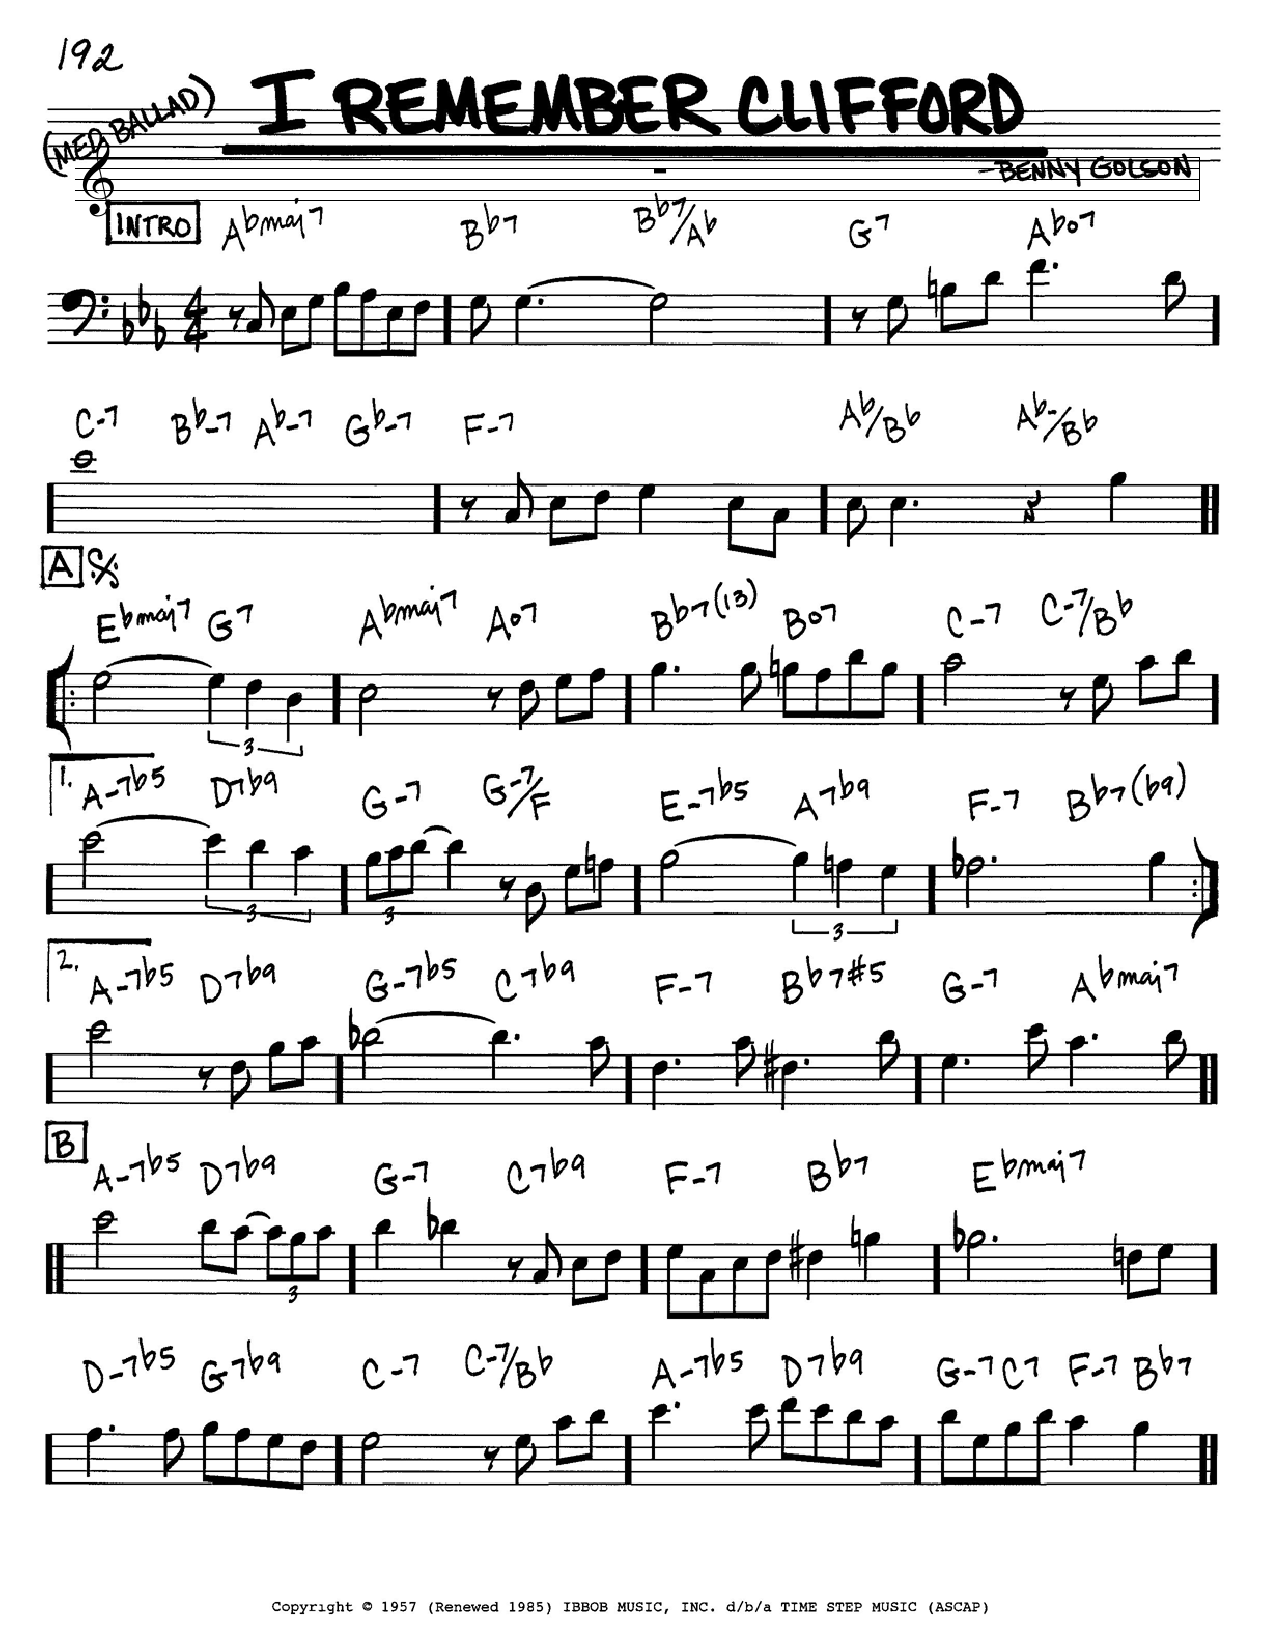 Benny Golson I Remember Clifford sheet music notes and chords. Download Printable PDF.